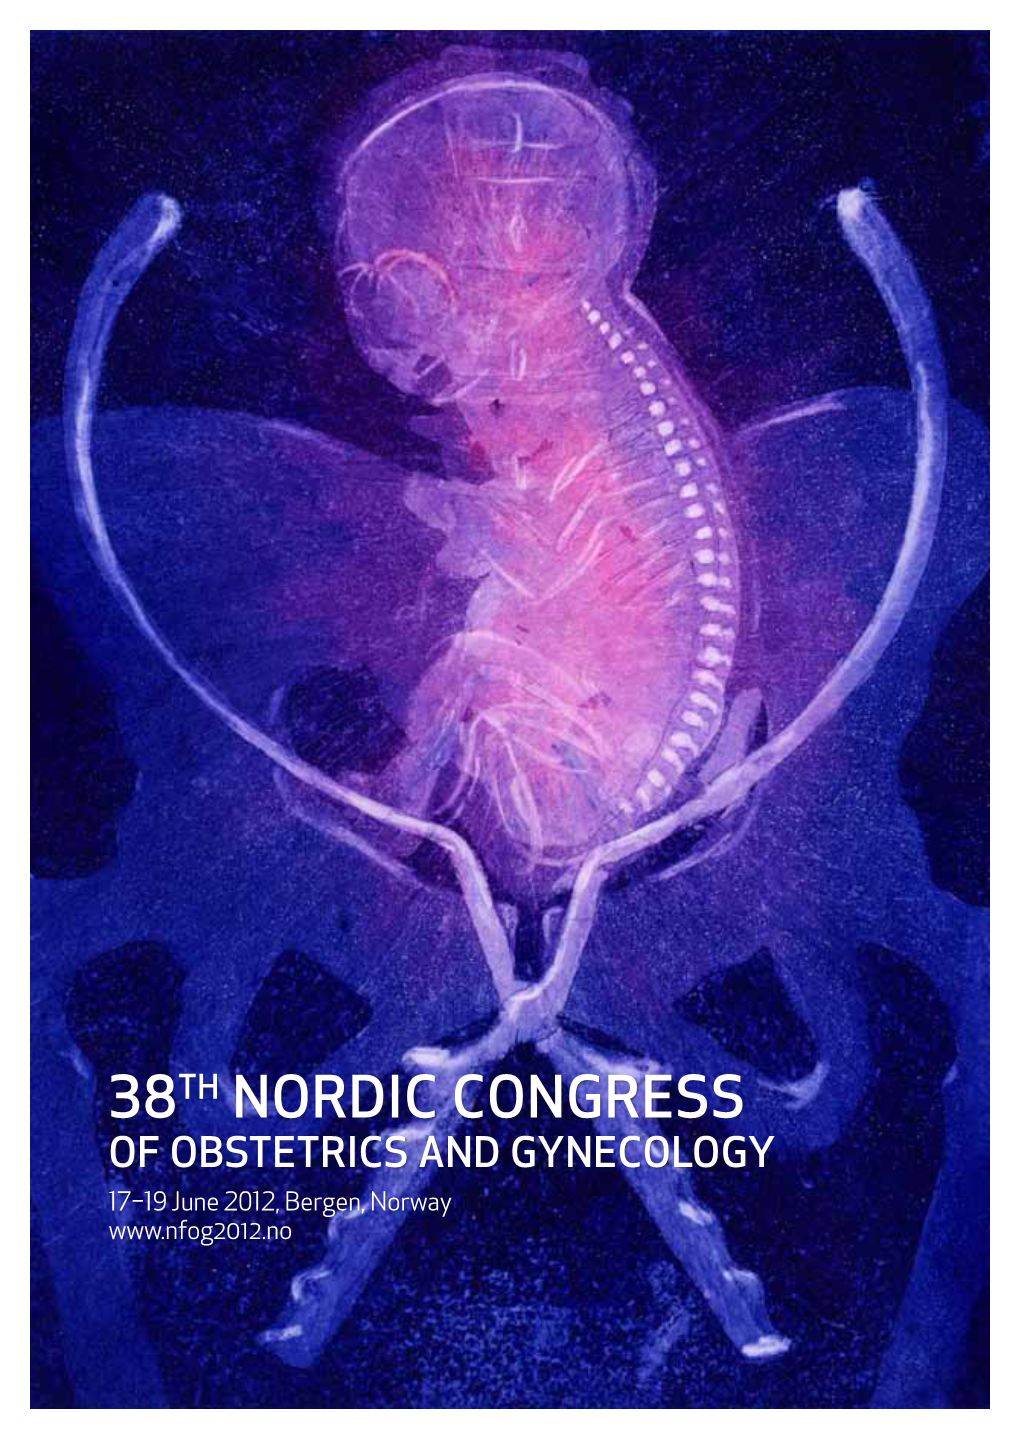 38Th Nordic Congress of Obstetrics and Gynecology 17–19 June 2012, Bergen, Norway Table of Contents: Organisation 3